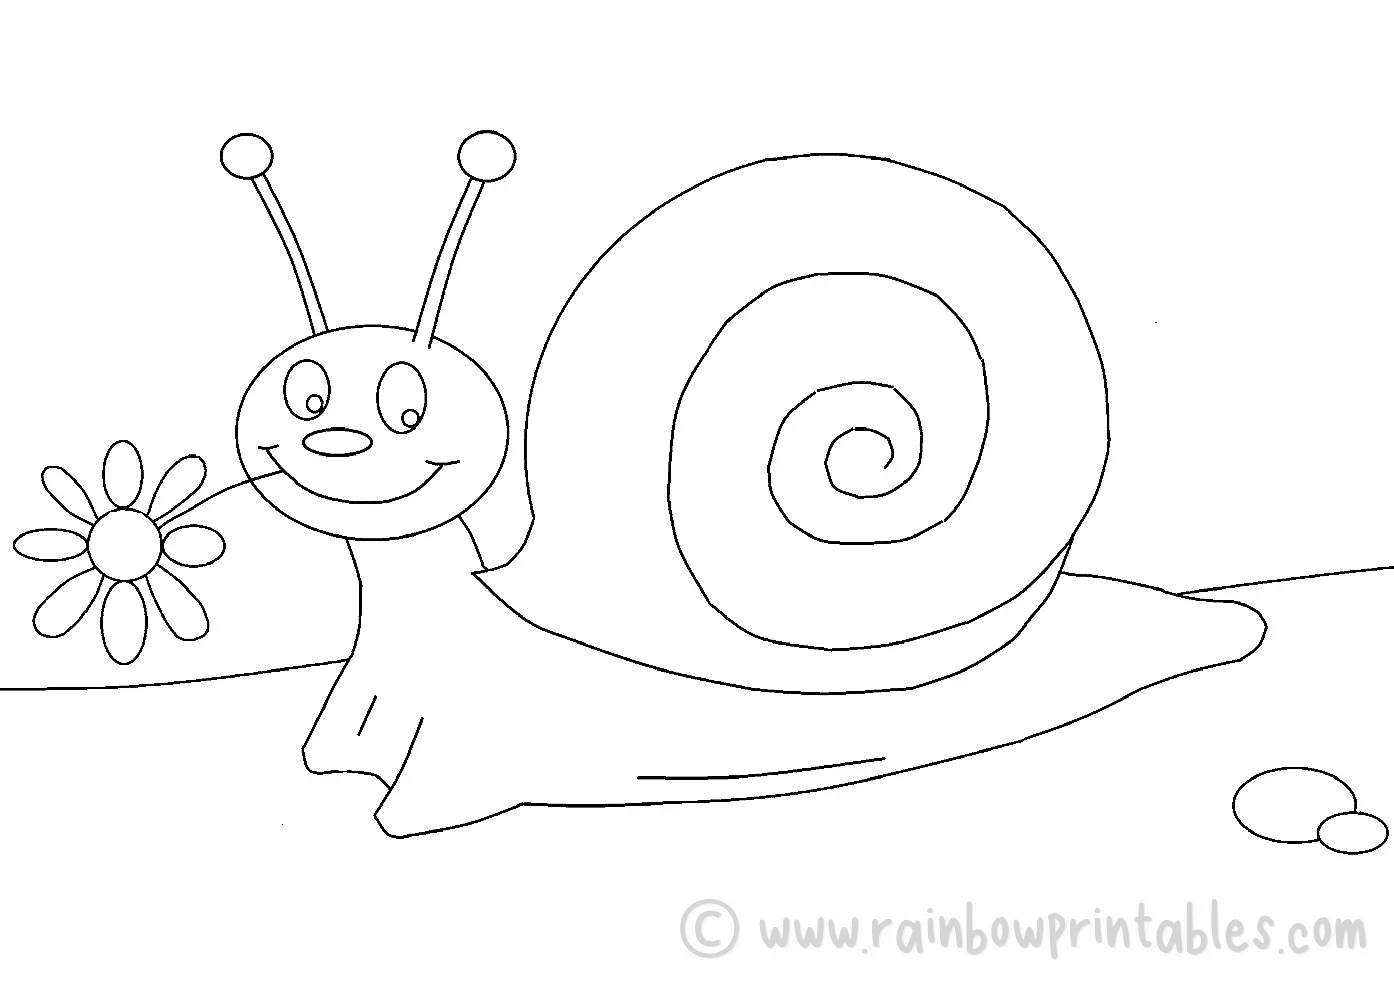 cartoon-SNAIL-coloring-page-cartoon-insect-art-activity-for-kids